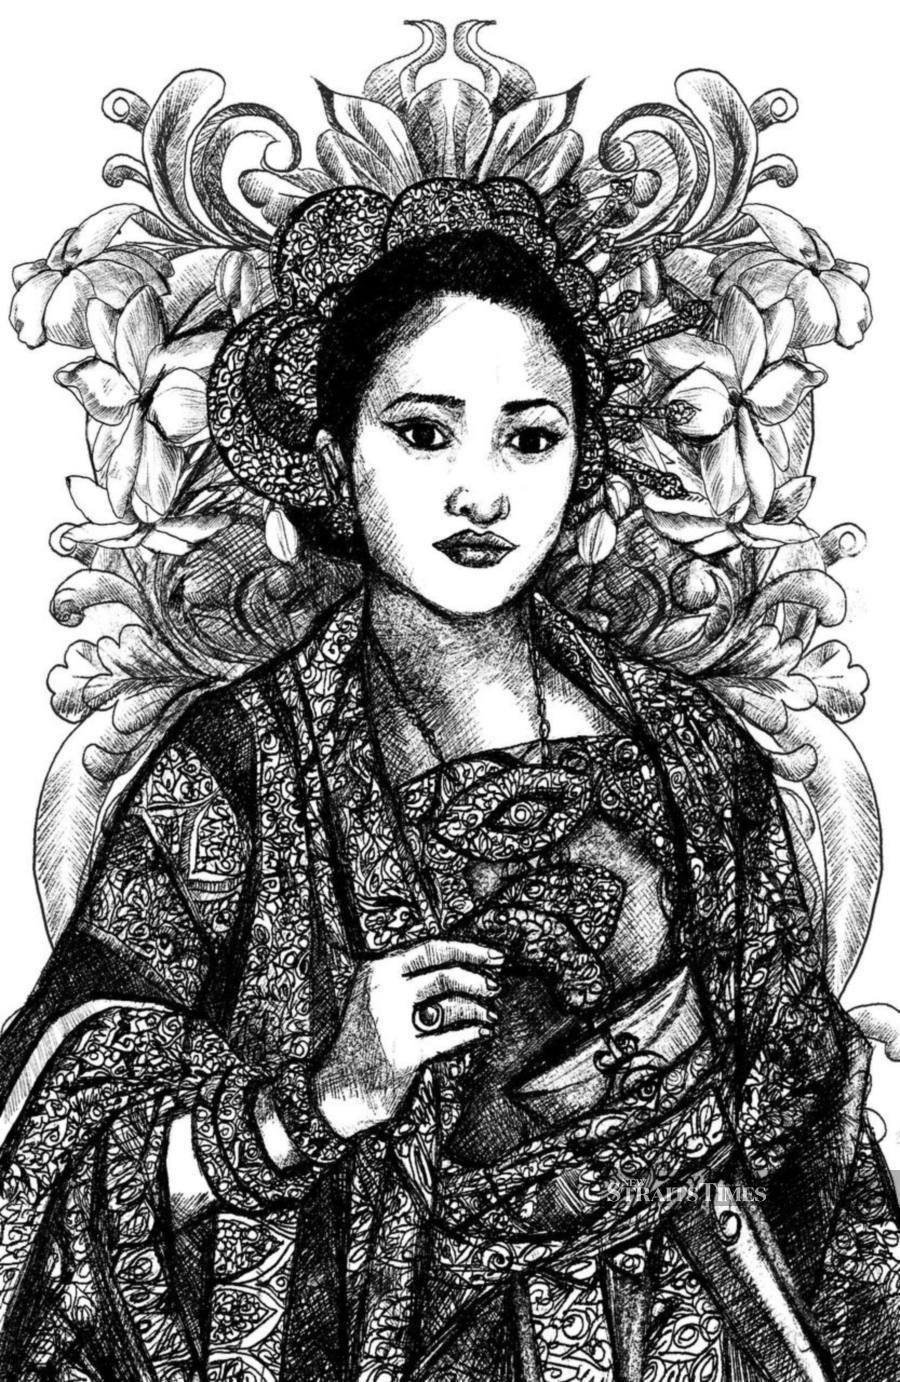  Tun Fatimah, the Melaka queen in the early 16th century, was key to relations with the Uthmaniyah empire in this YA historical fiction. Illustrated by Ariyana Ahmad.